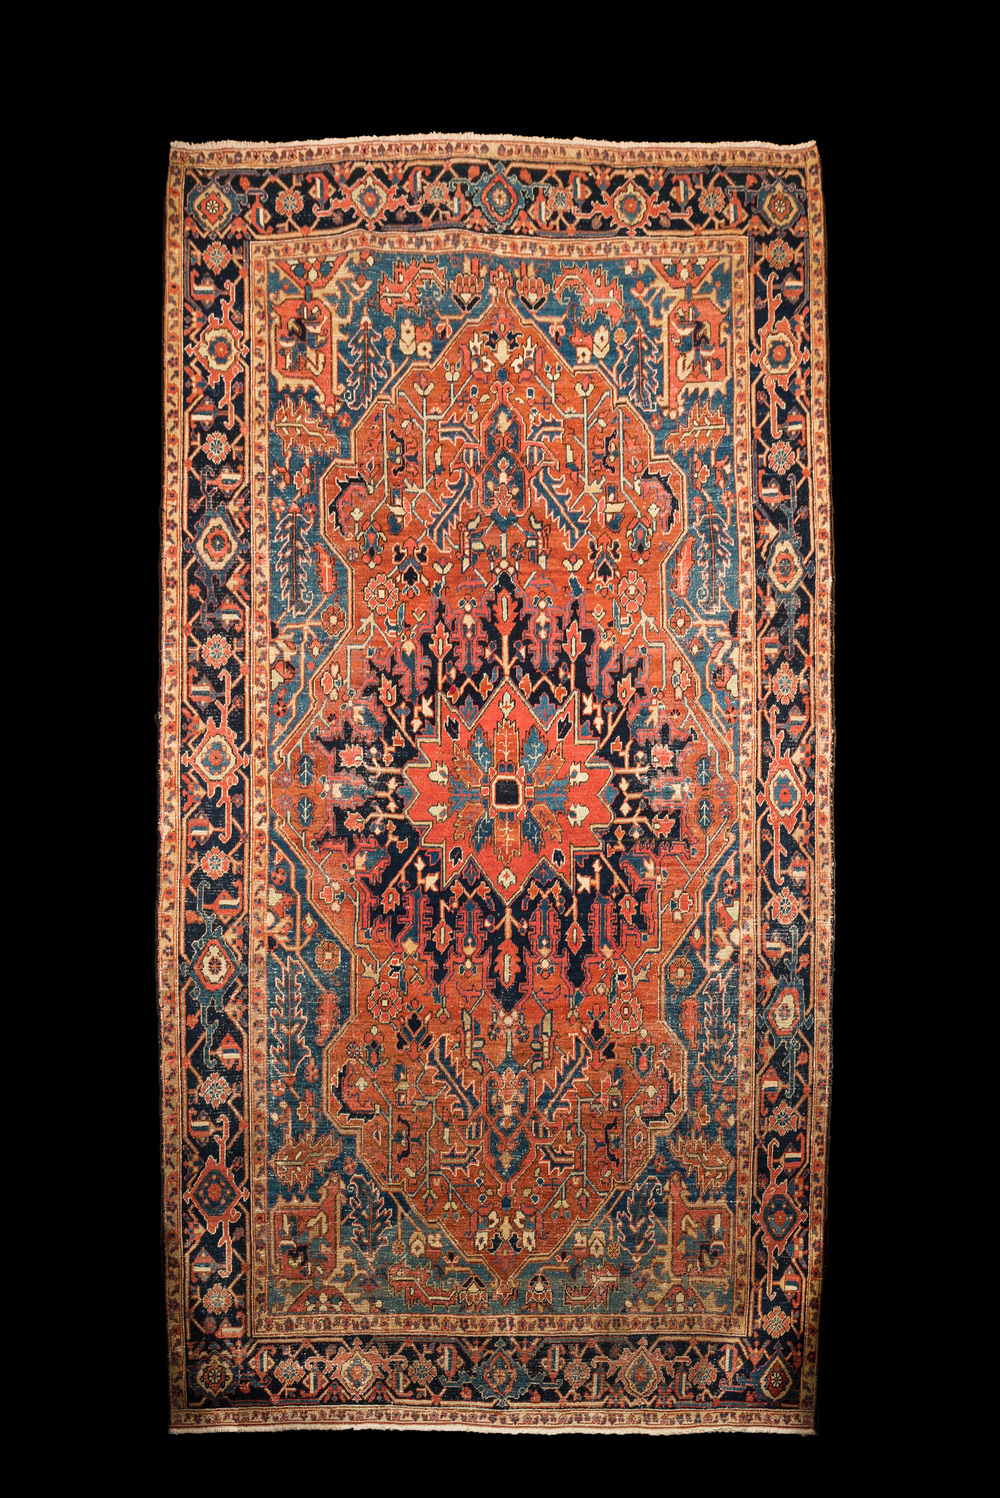 A Persian Heriz rug with floral design and geometric motifs, wool on cotton, 1st half 20th C.